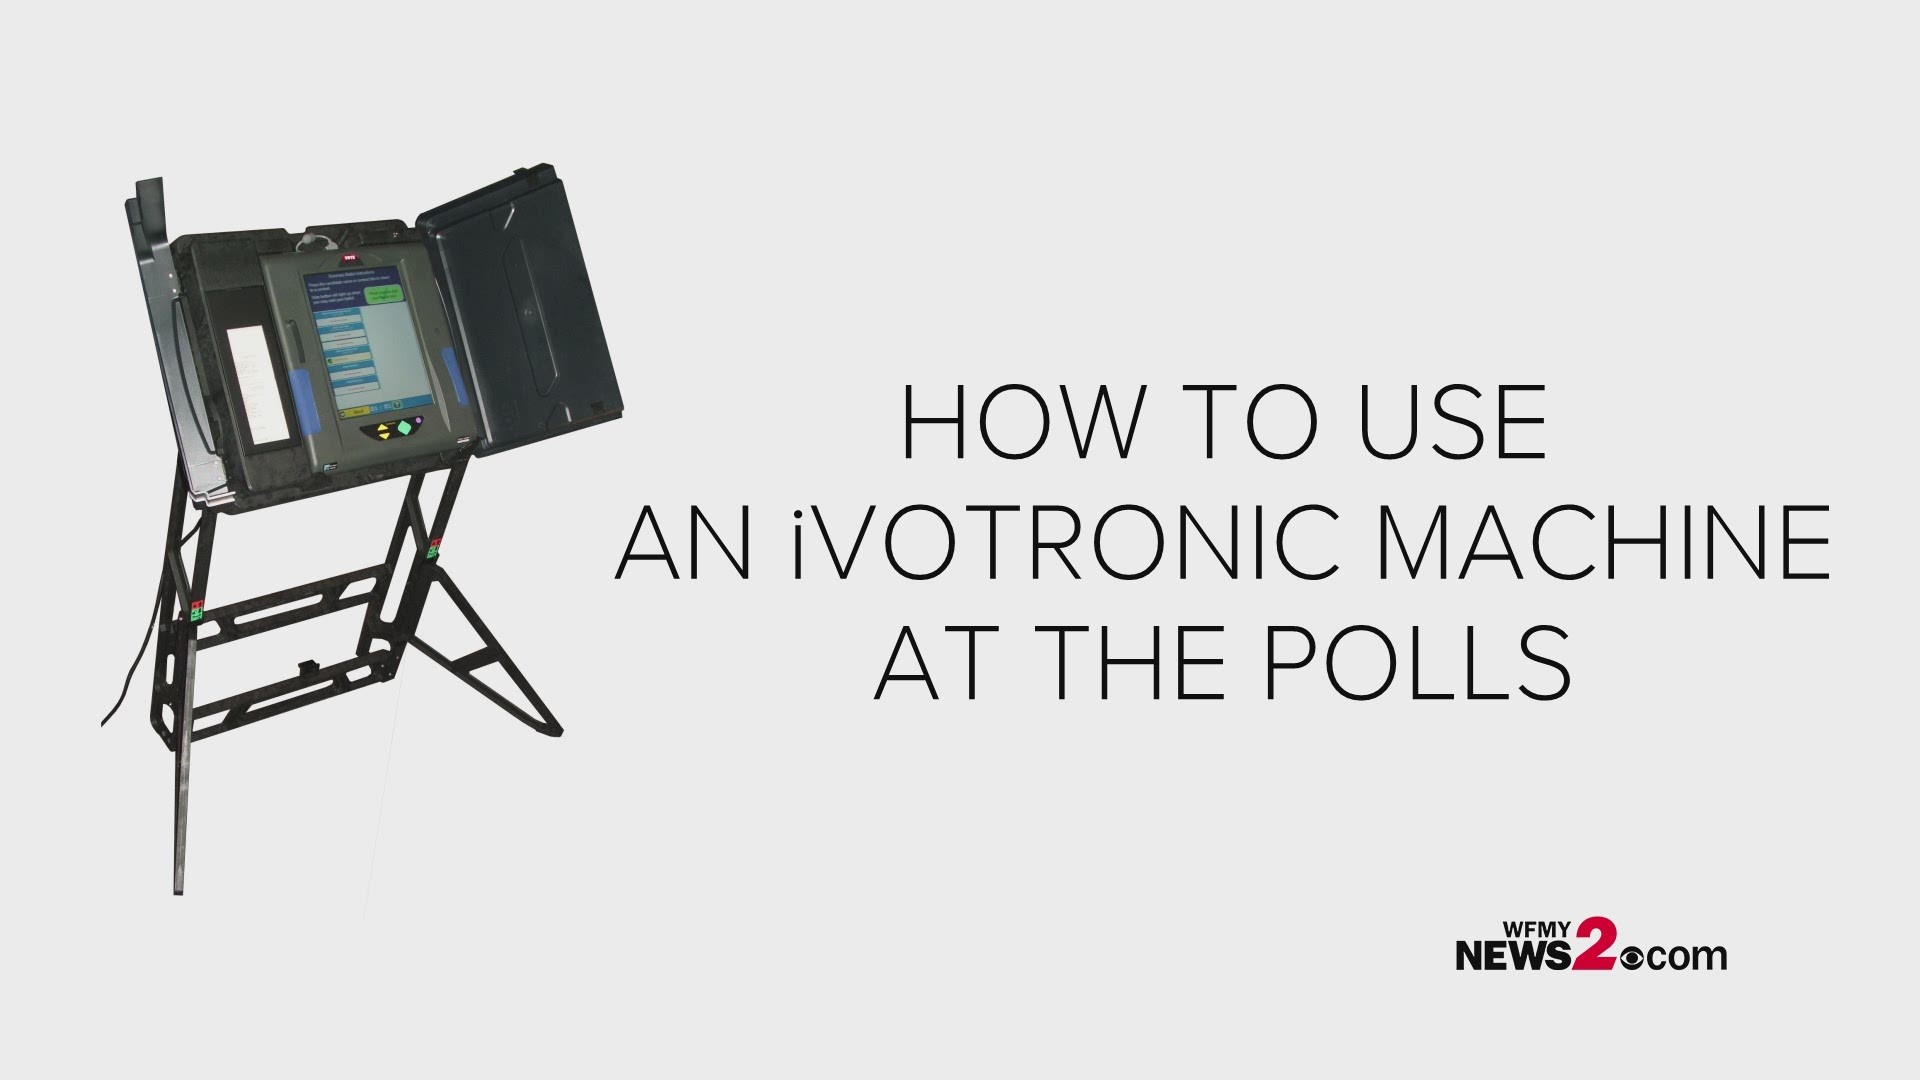 35 North Carolina counties use the iVotronic machines for at least a portion of voting. Here's a step-by-step on how to use the iVotronic machines on Election Day.